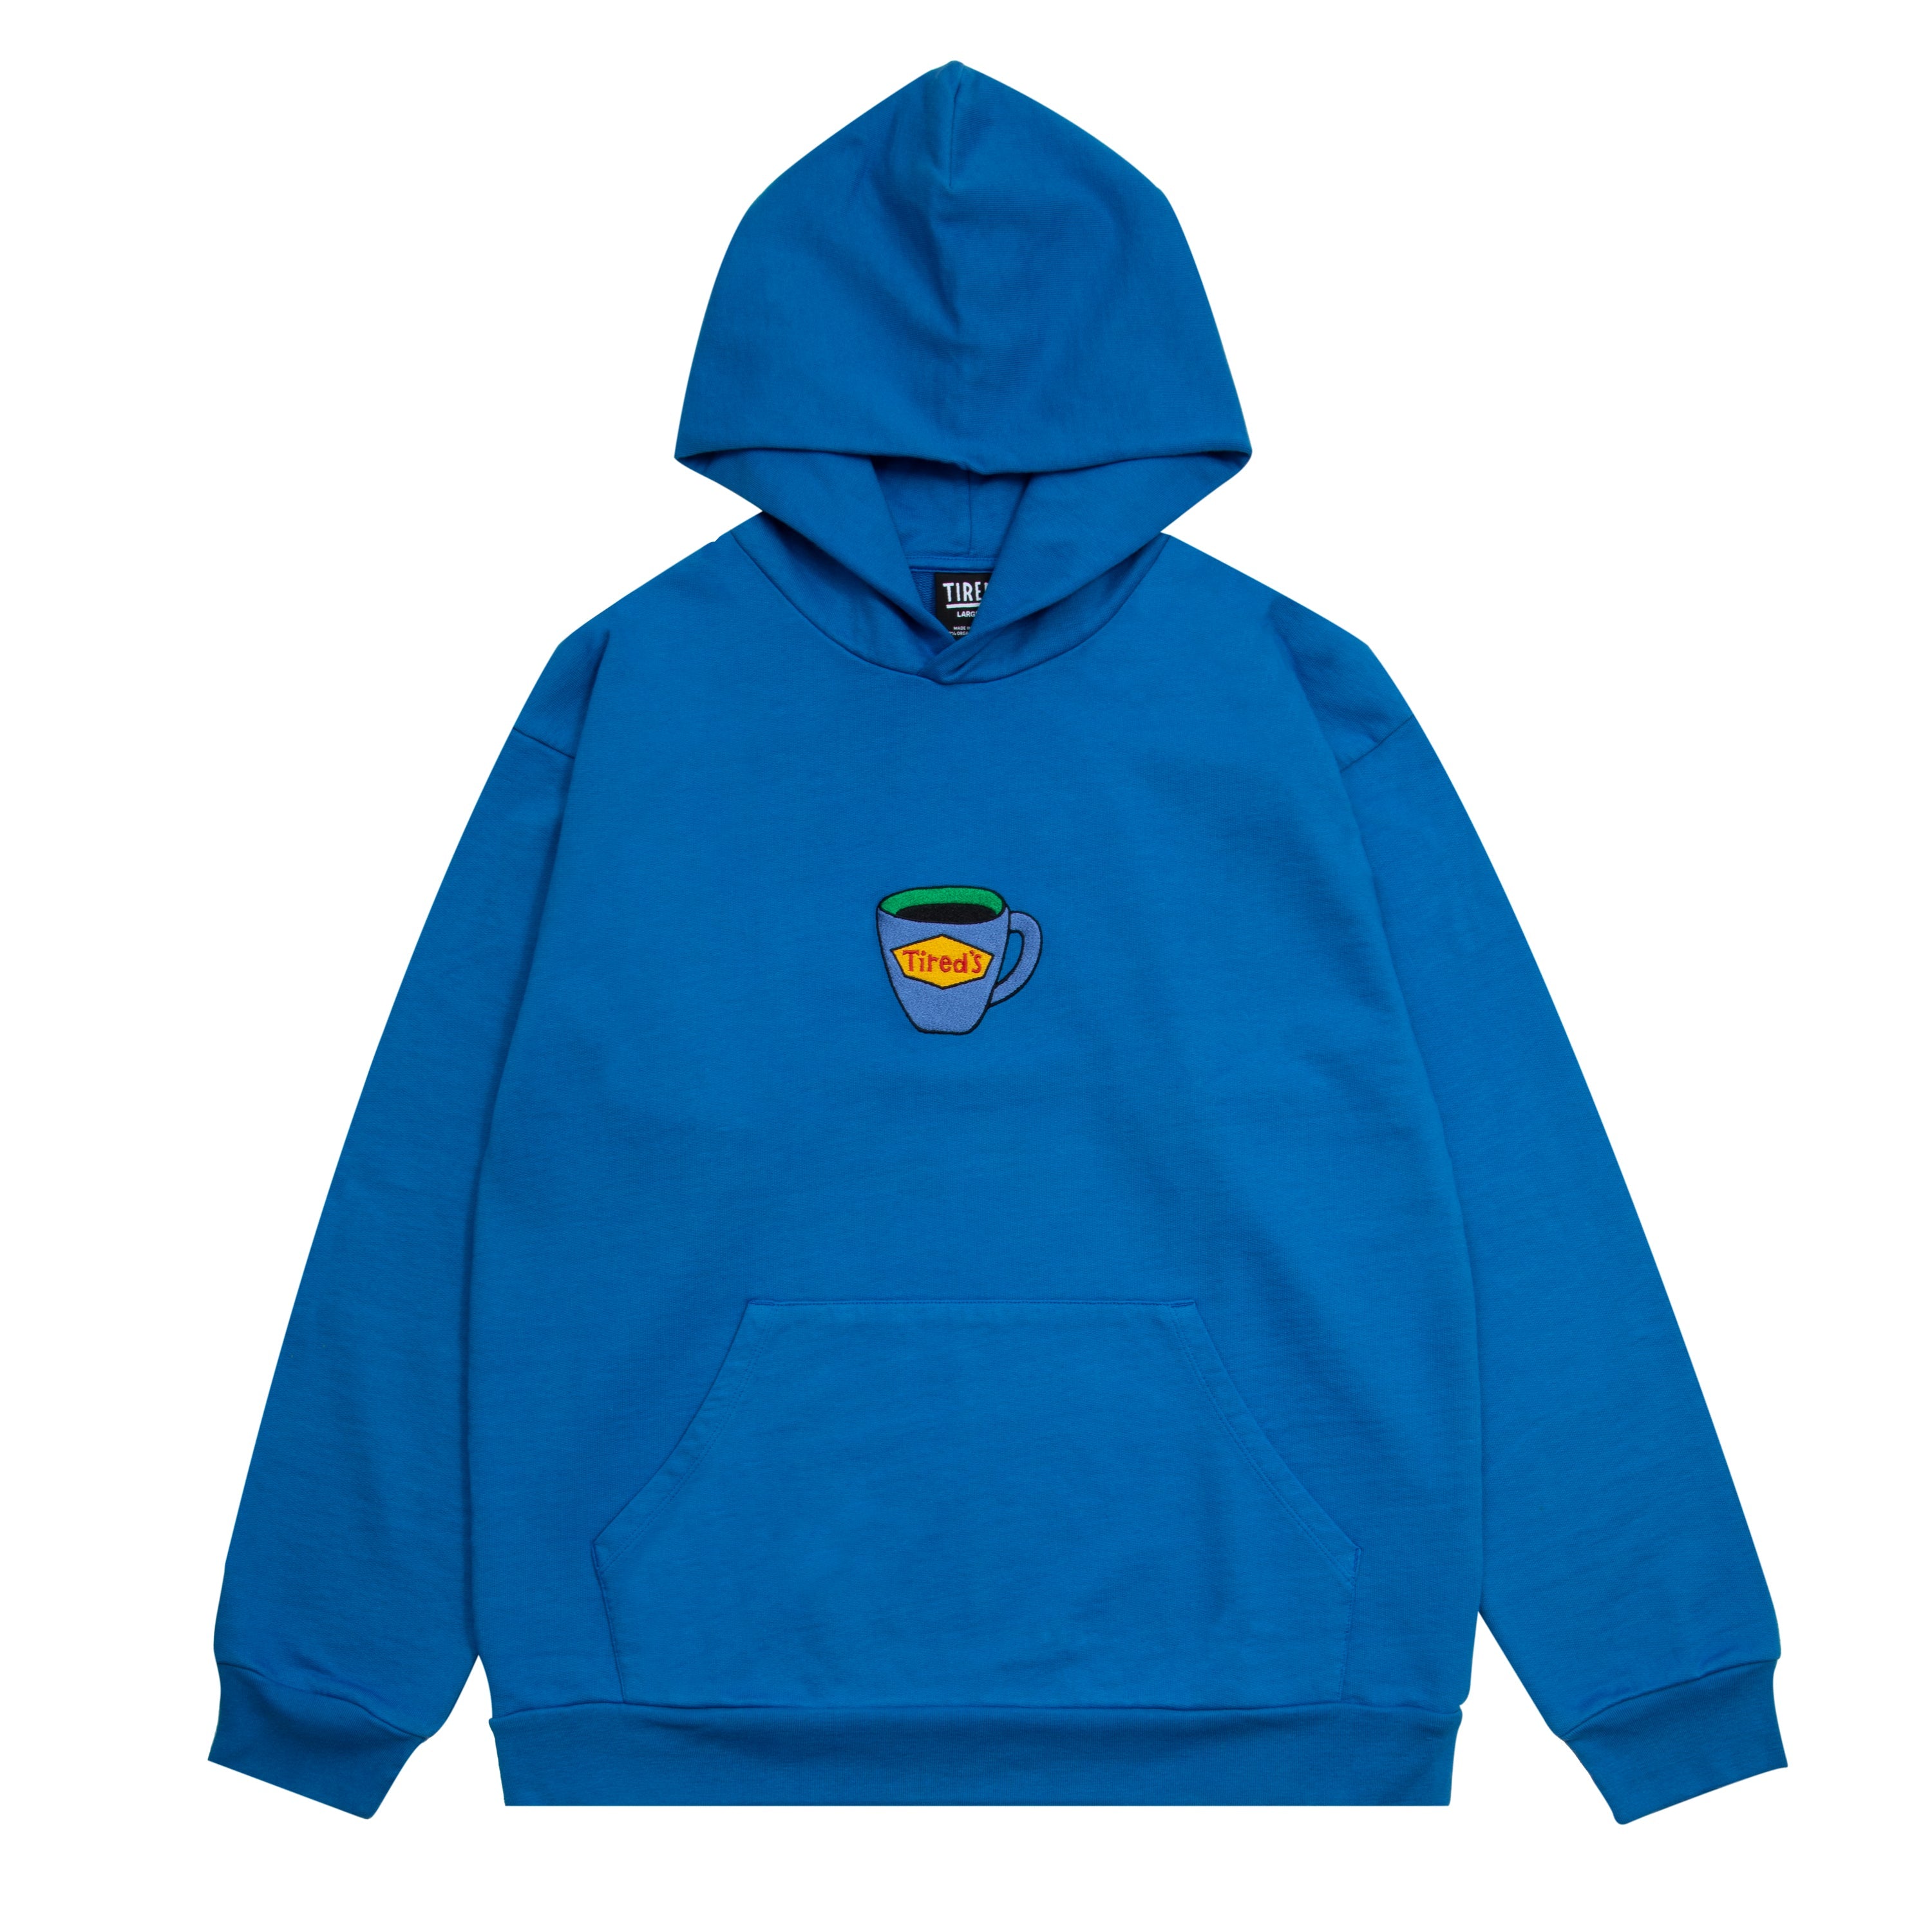 Tired Skateboards Tired's Hoodie - Royal